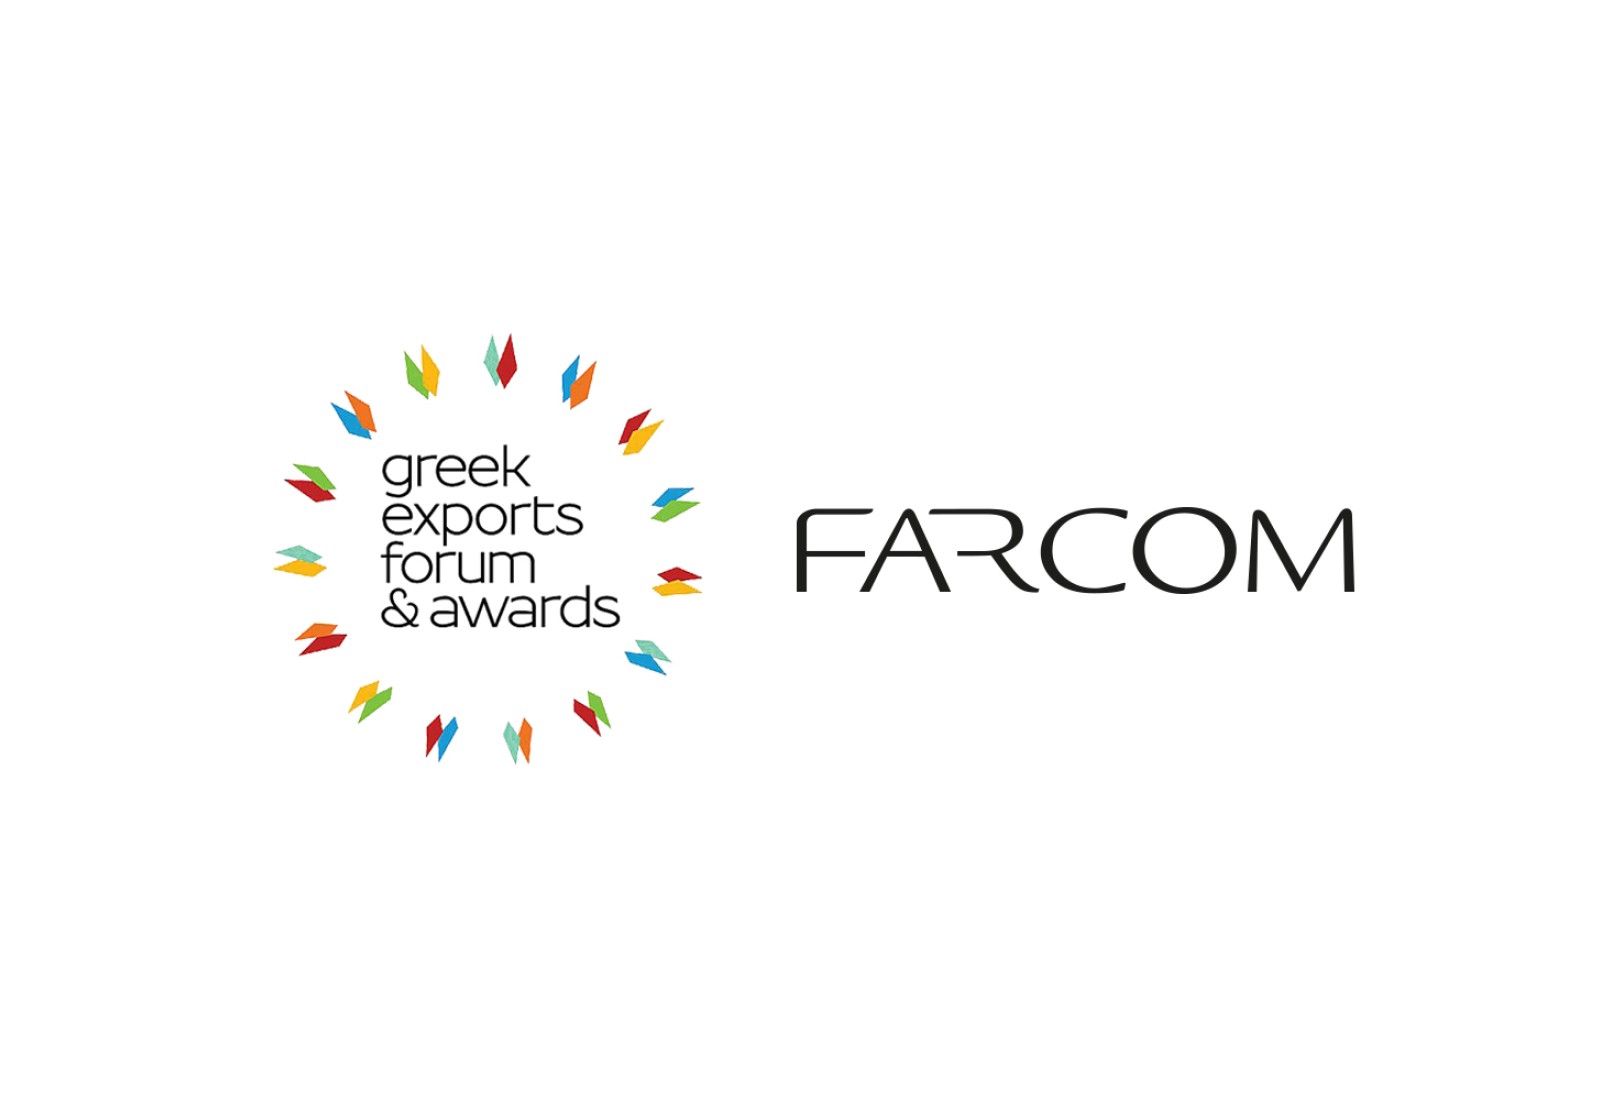 Farcom has just received two priceless awards at the "Greek Exports Forum & Awards 2021"